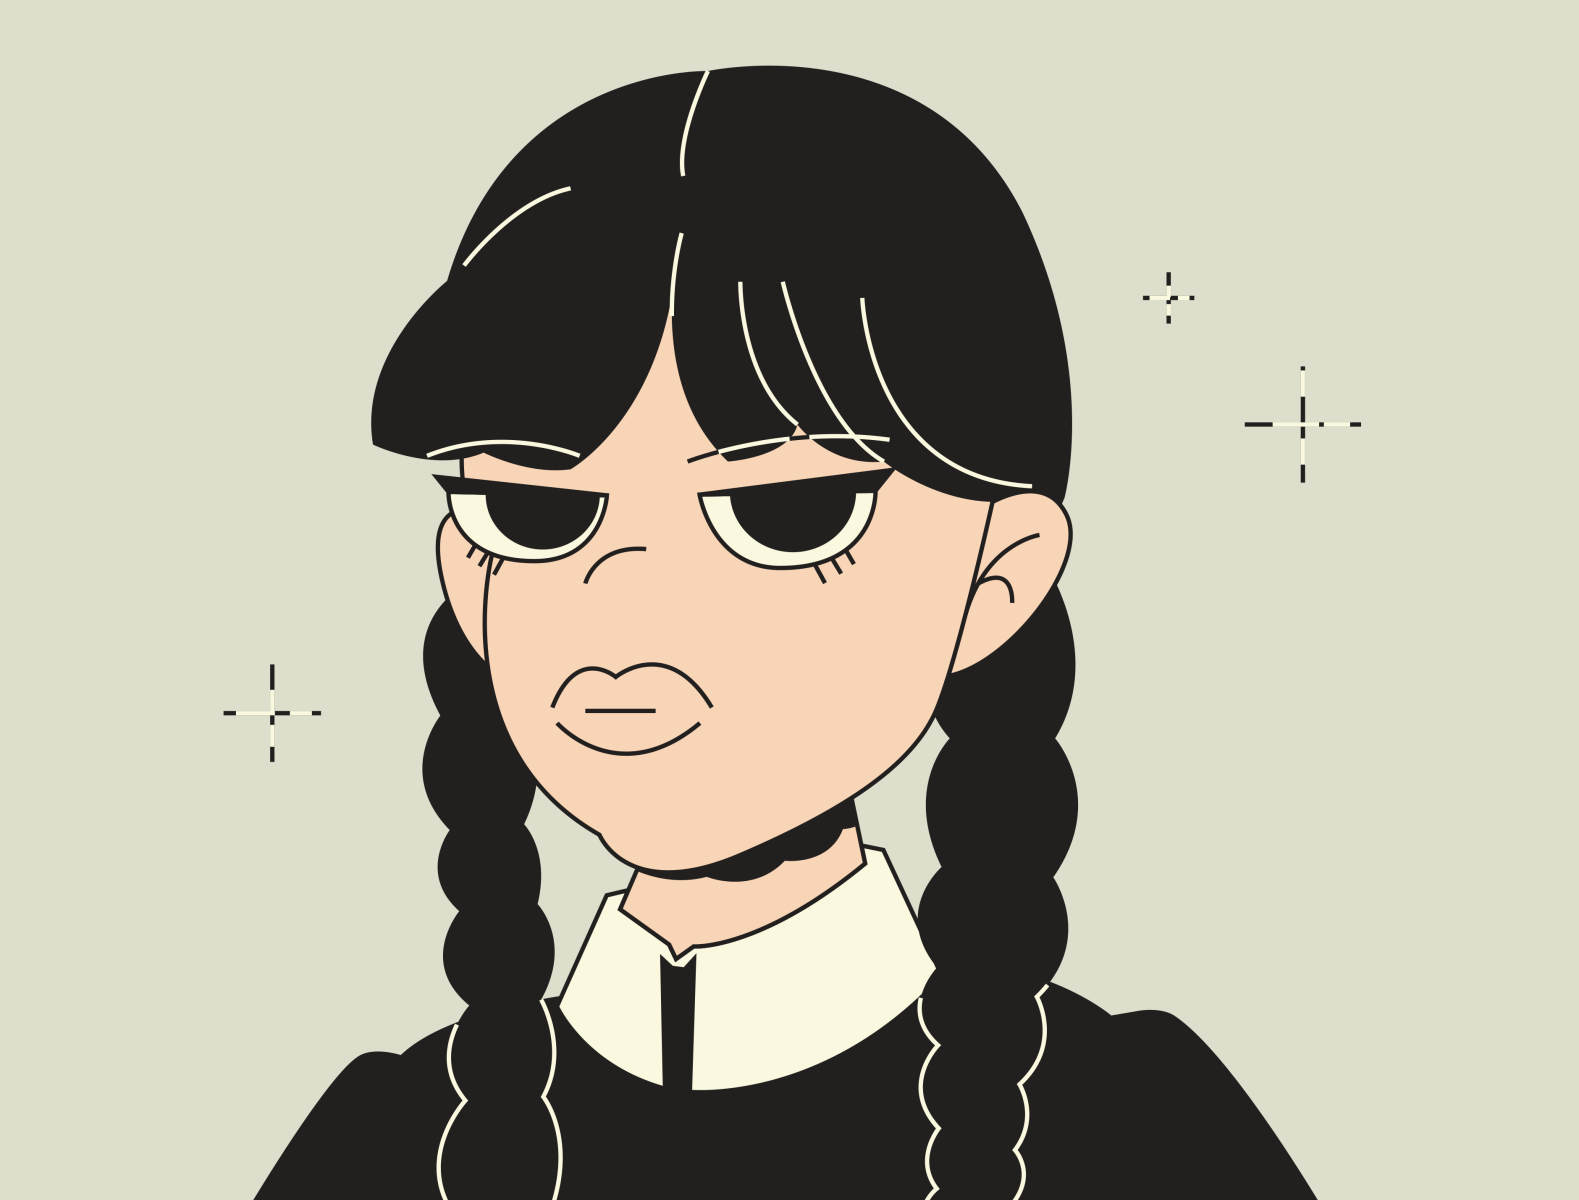 Wednesday Addams by valestrator on Dribbble